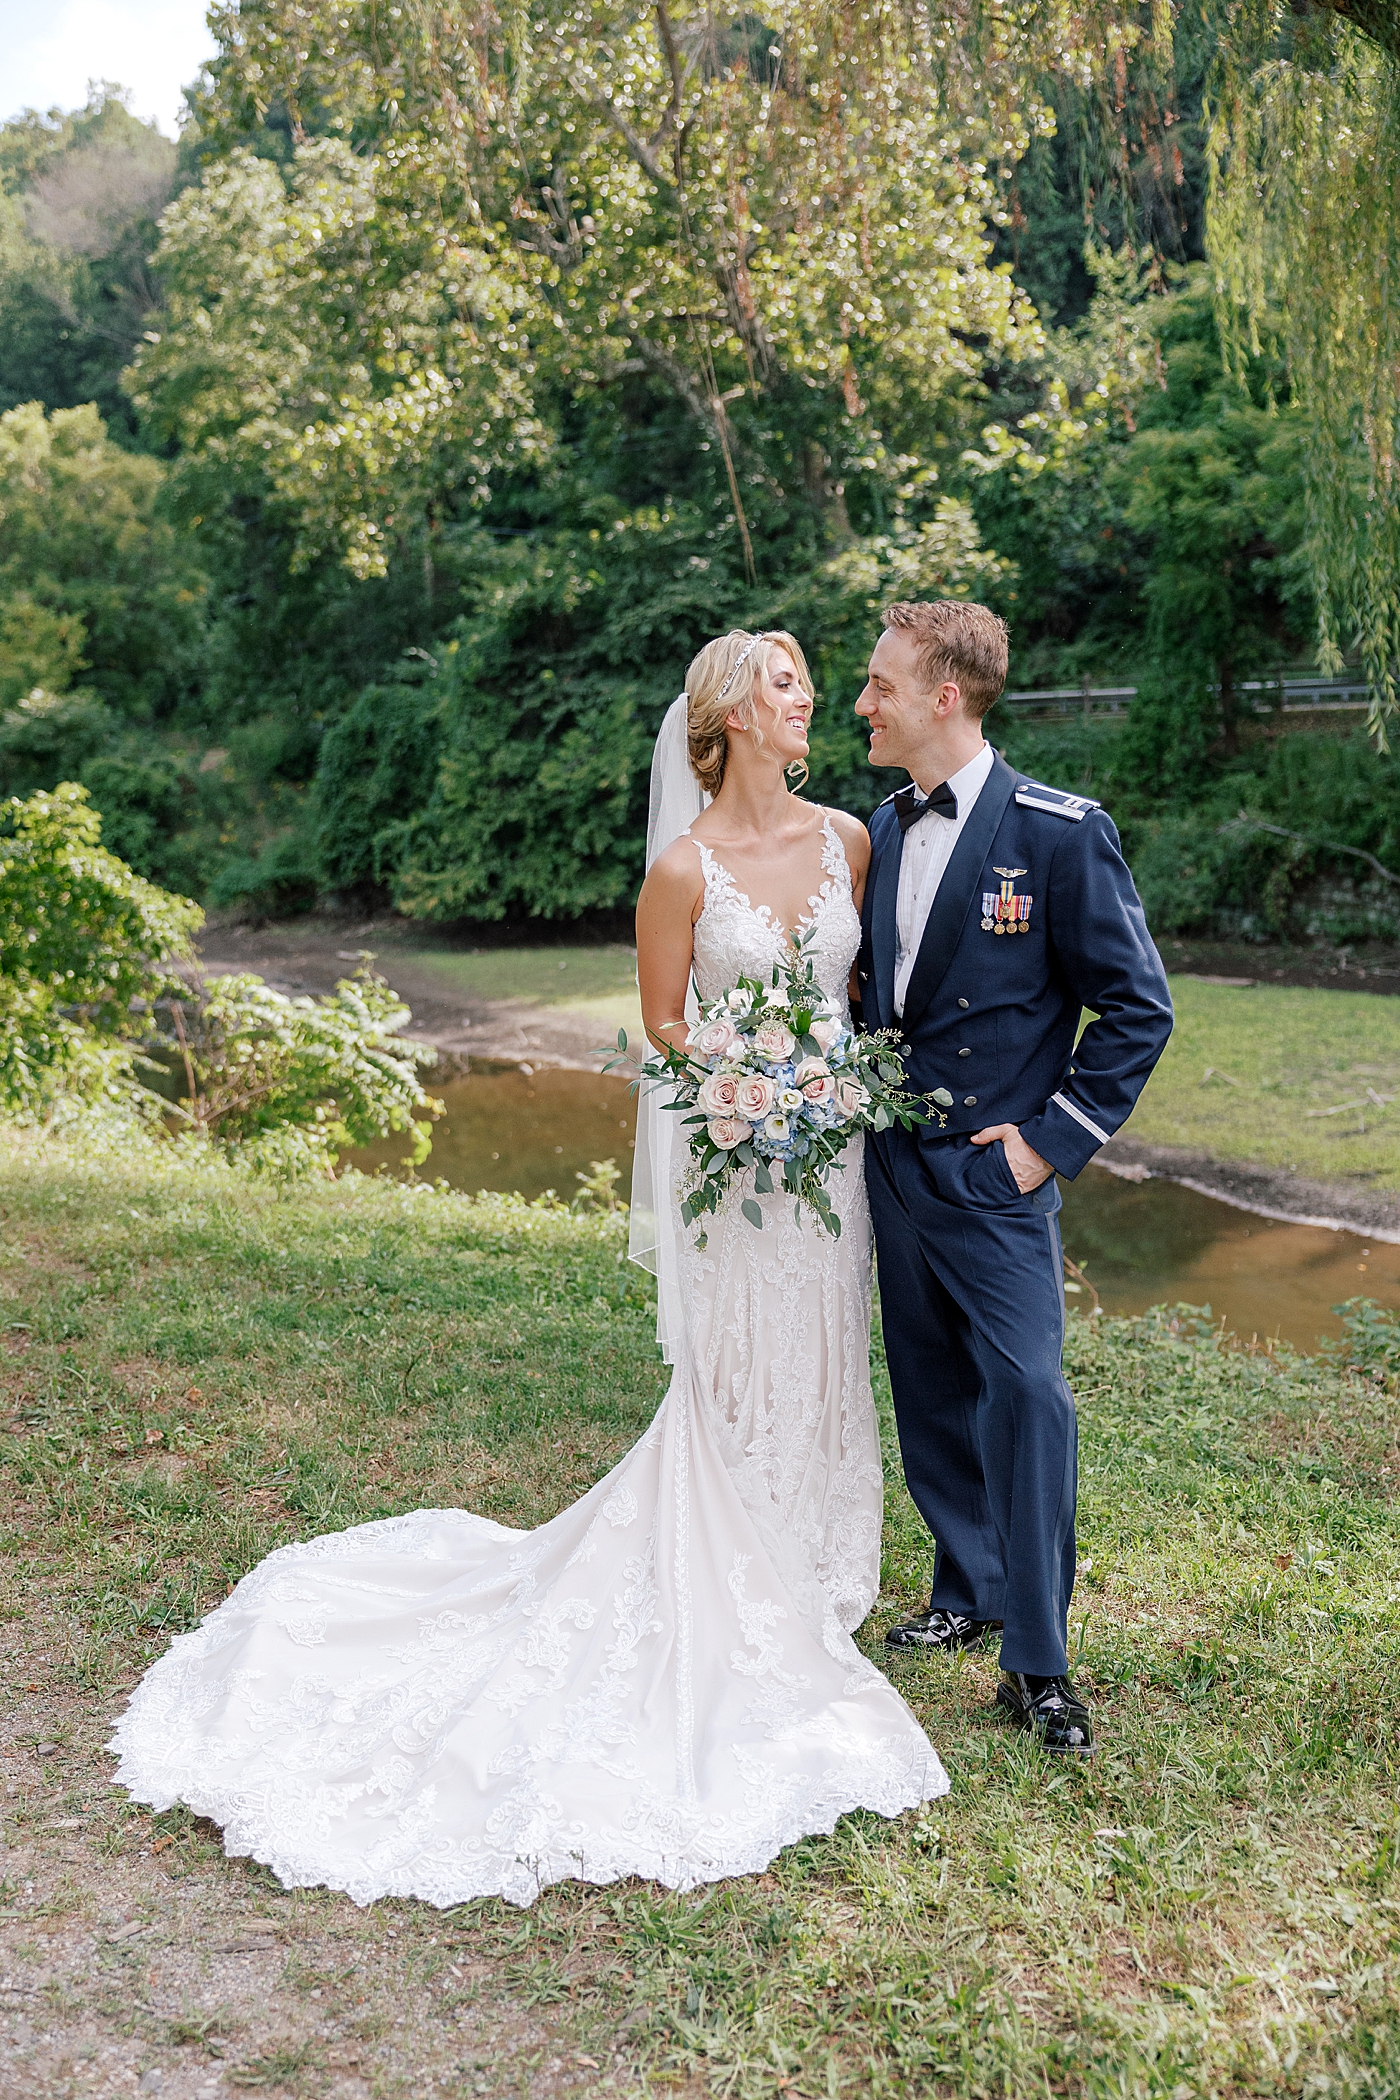 Bride and groom embracing near the water | Image by Hope Helmuth Photography